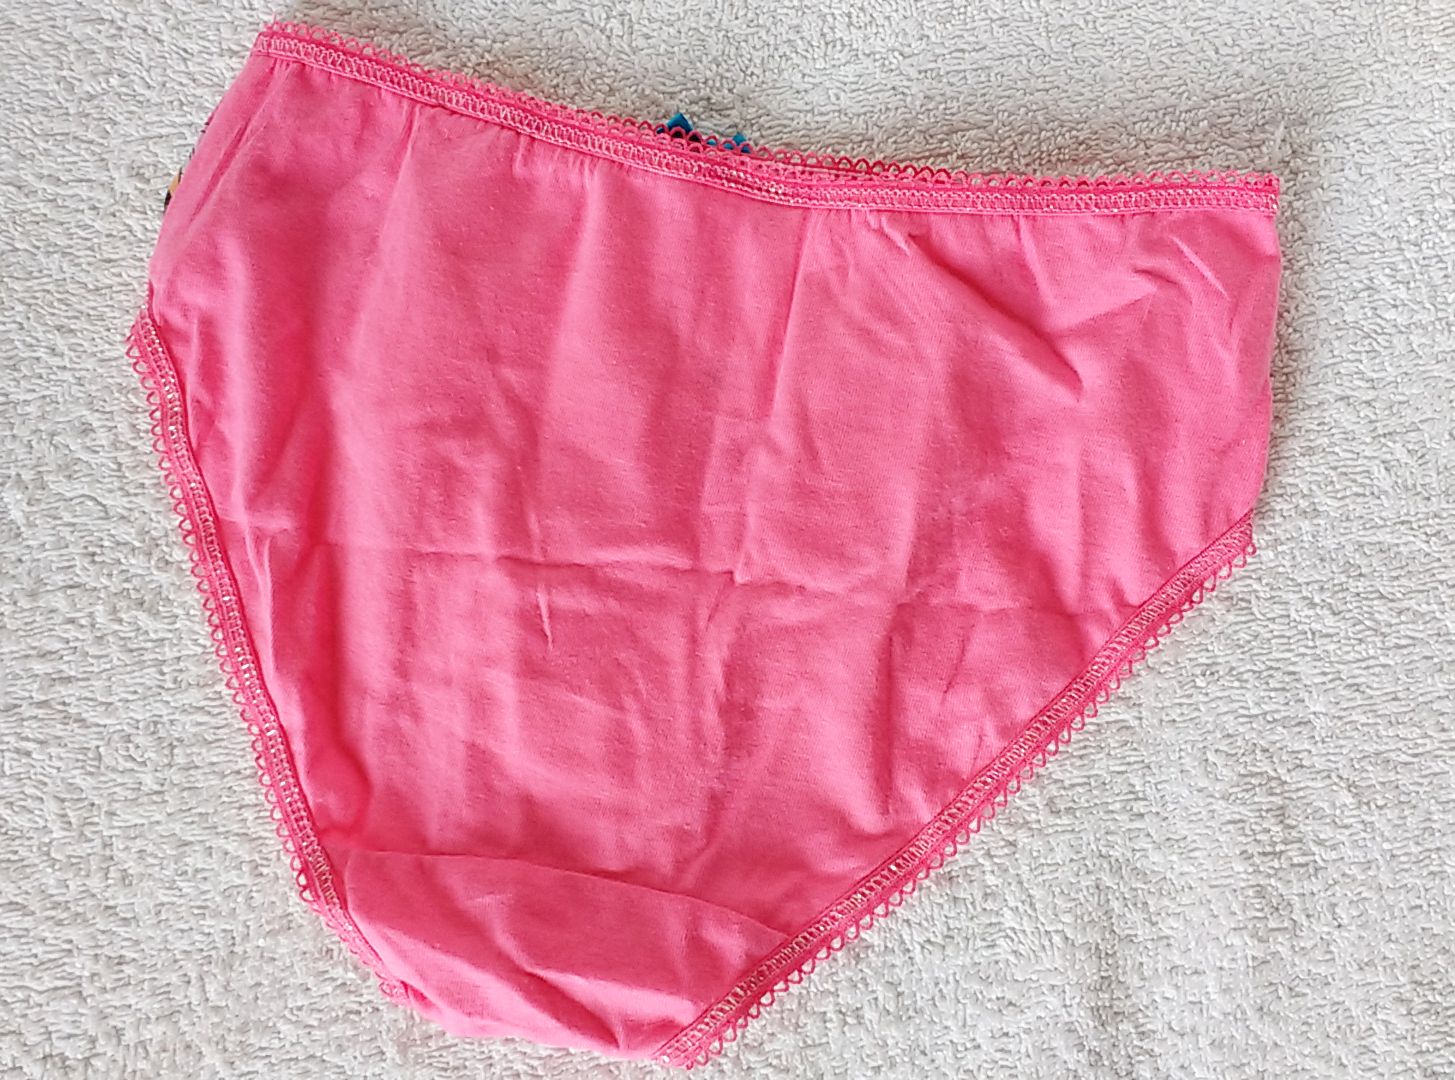 Pretty Girls 8 9 Yrs Candy Pink Stars Brief Panties Cotton Knickers Ebay